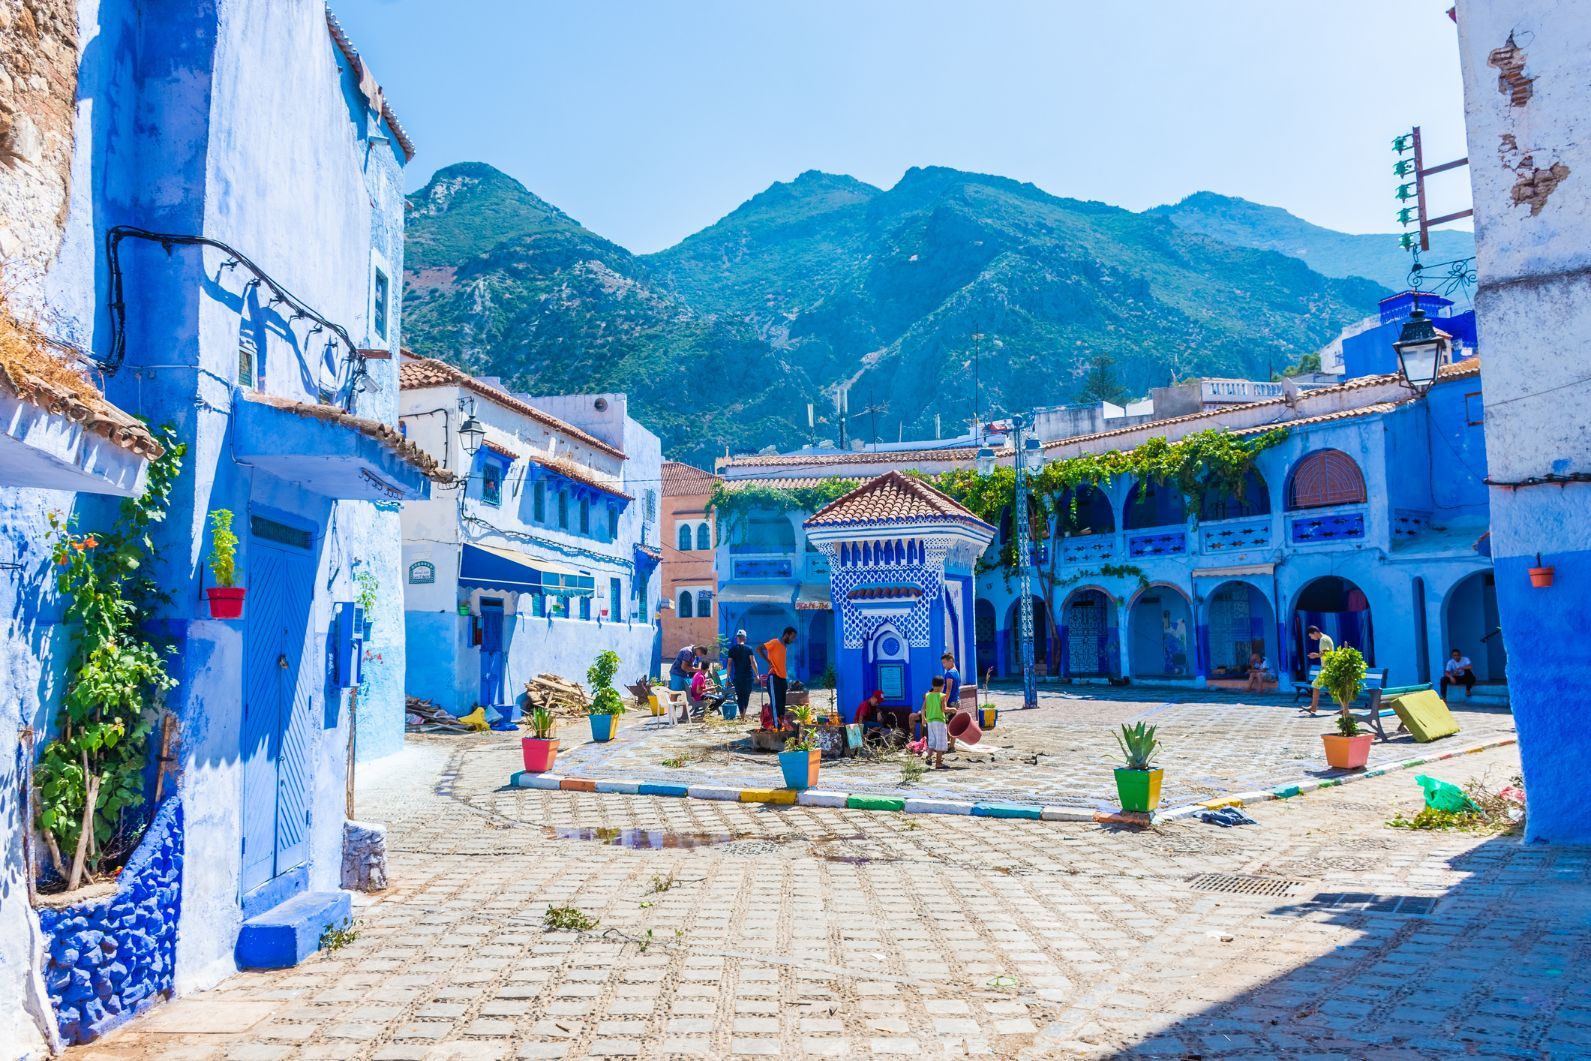 Place Outa el Hammam, the main open square in Chefchaouen, with the backdrop of the mountains behind. Photo: Getty